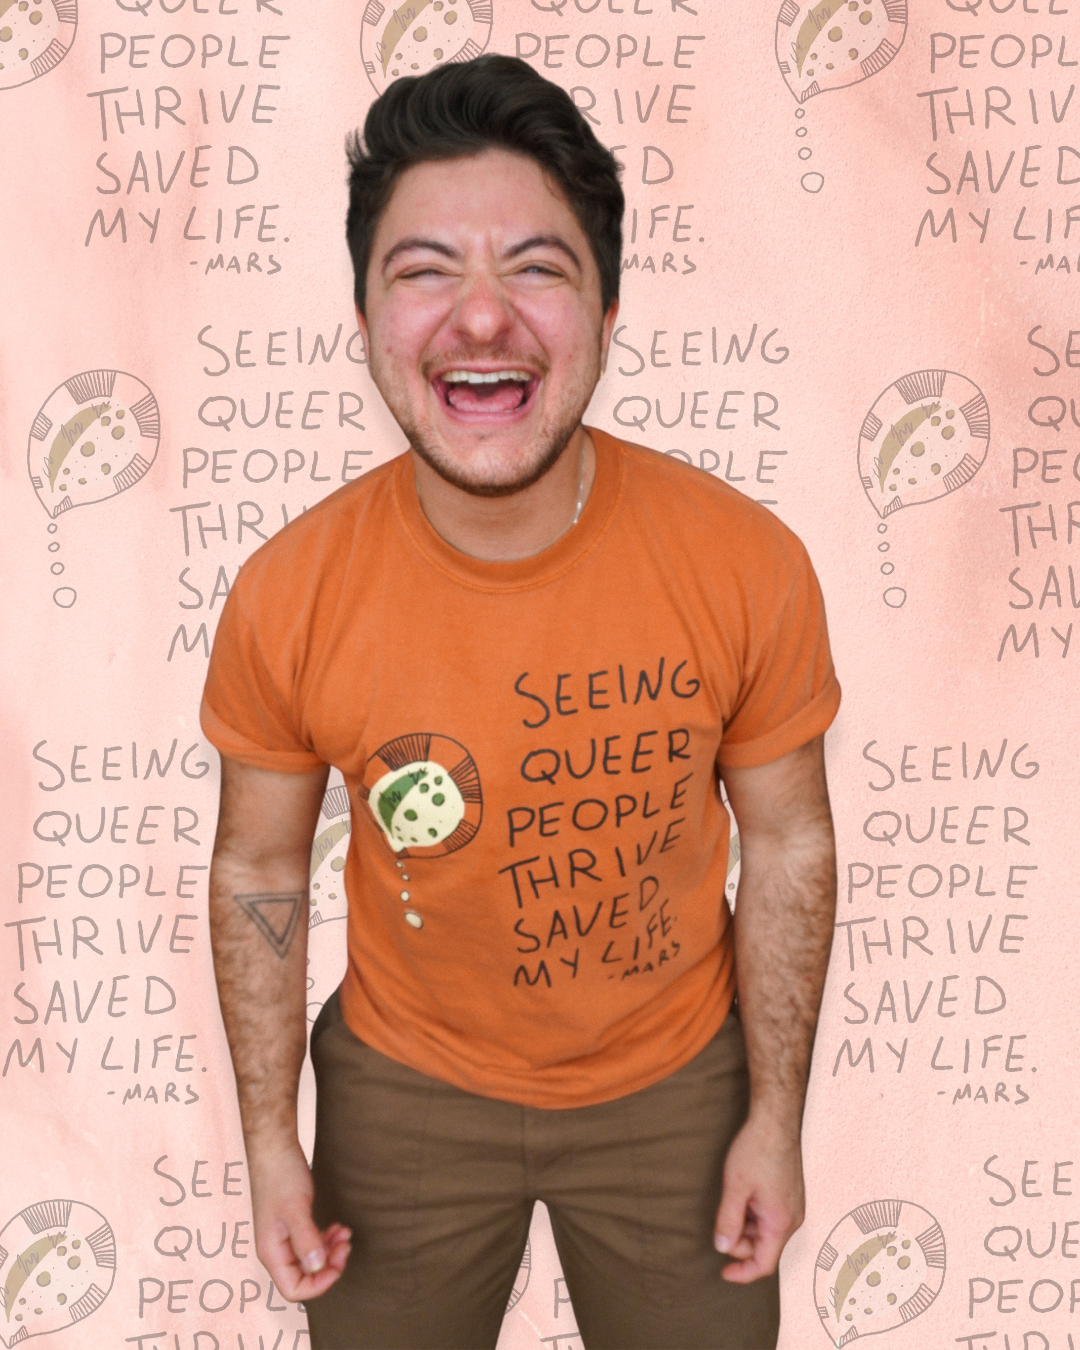 Seeing Queer People Thrive Saved My Life Shirt